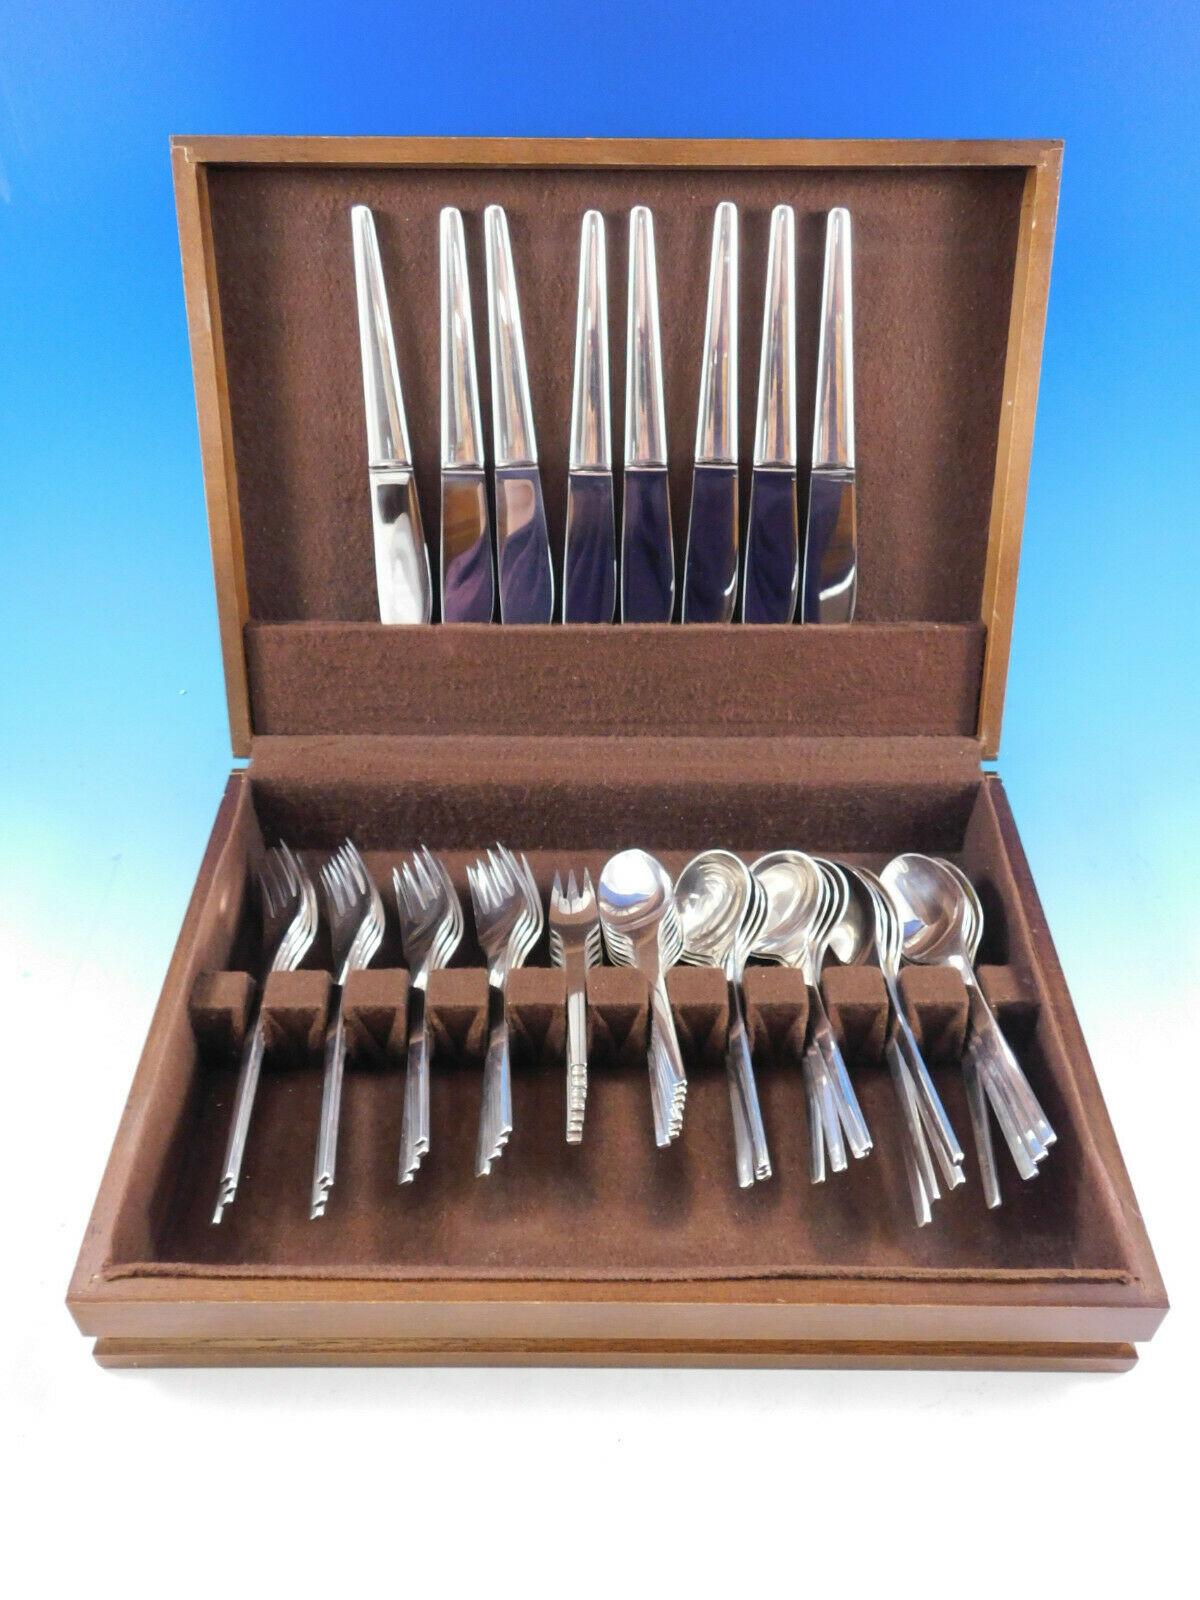 The Caravel cutlery pattern has won numerous awards including the prestigious Der goldene Leffel (1963) where the jury praised Caravel for its brilliant functionalist expression, style and understanding of silver. The Caravel pattern is signature